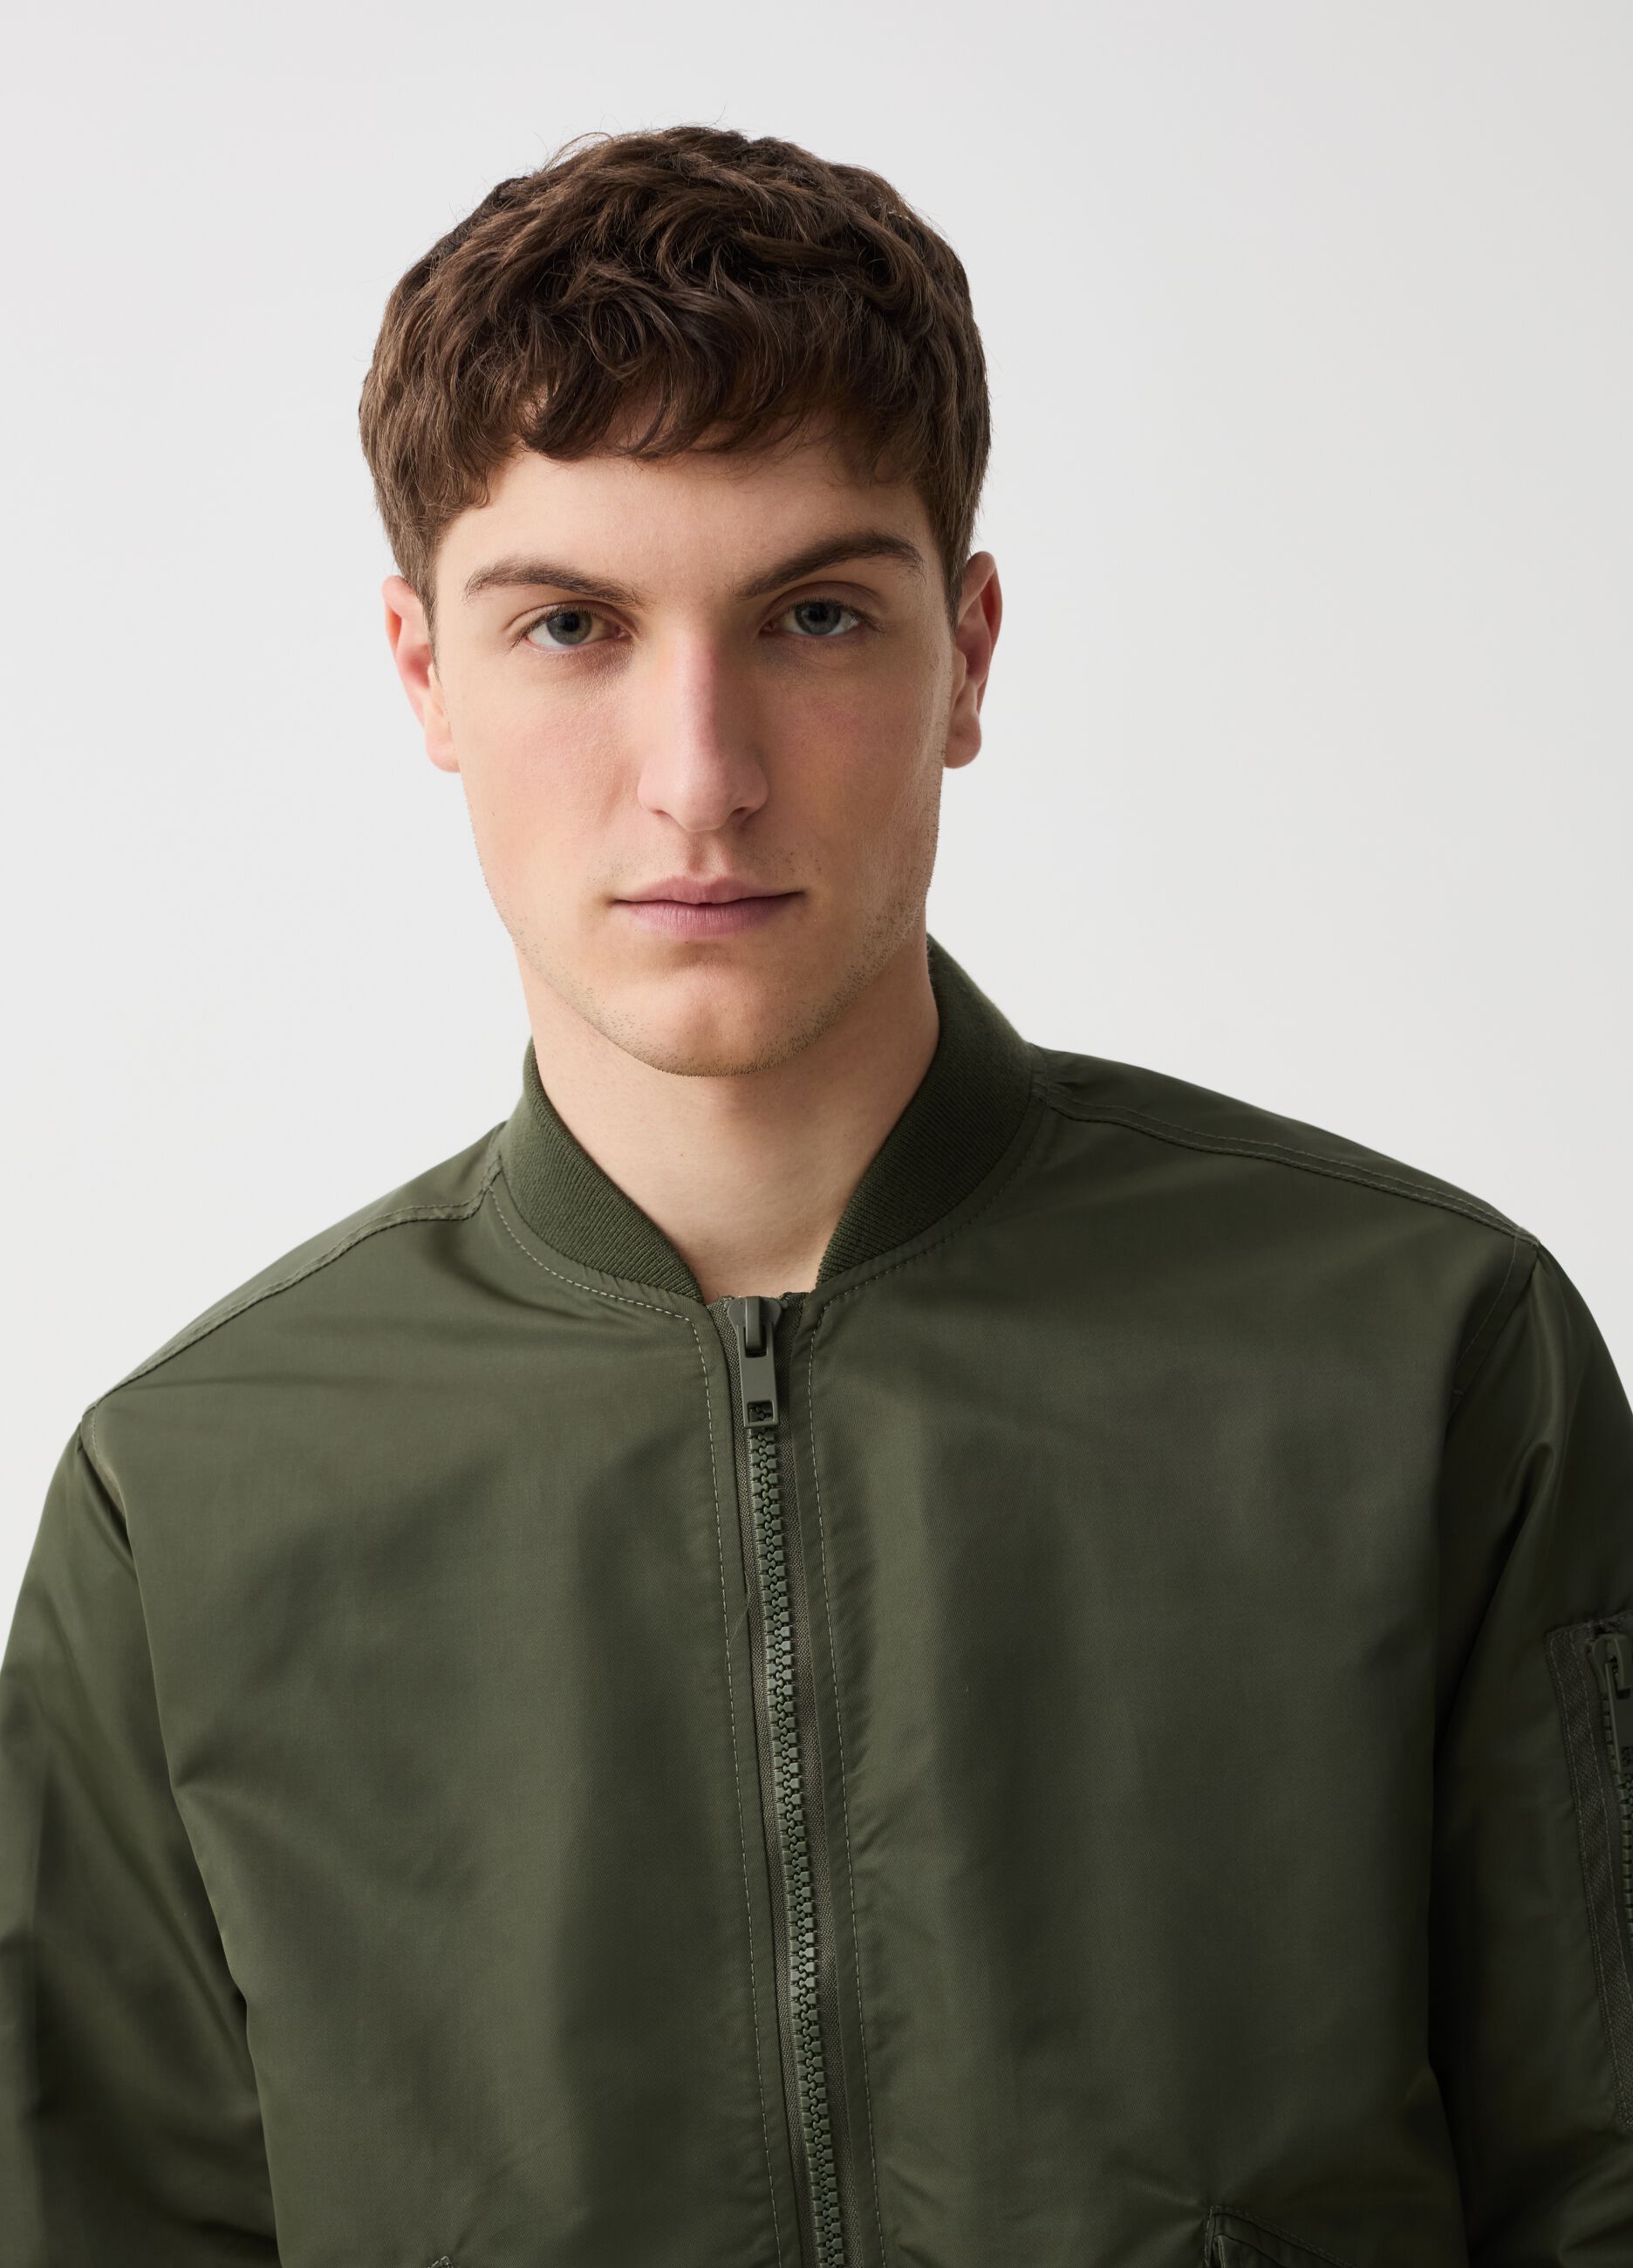 Solid colour full-zip bomber jacket